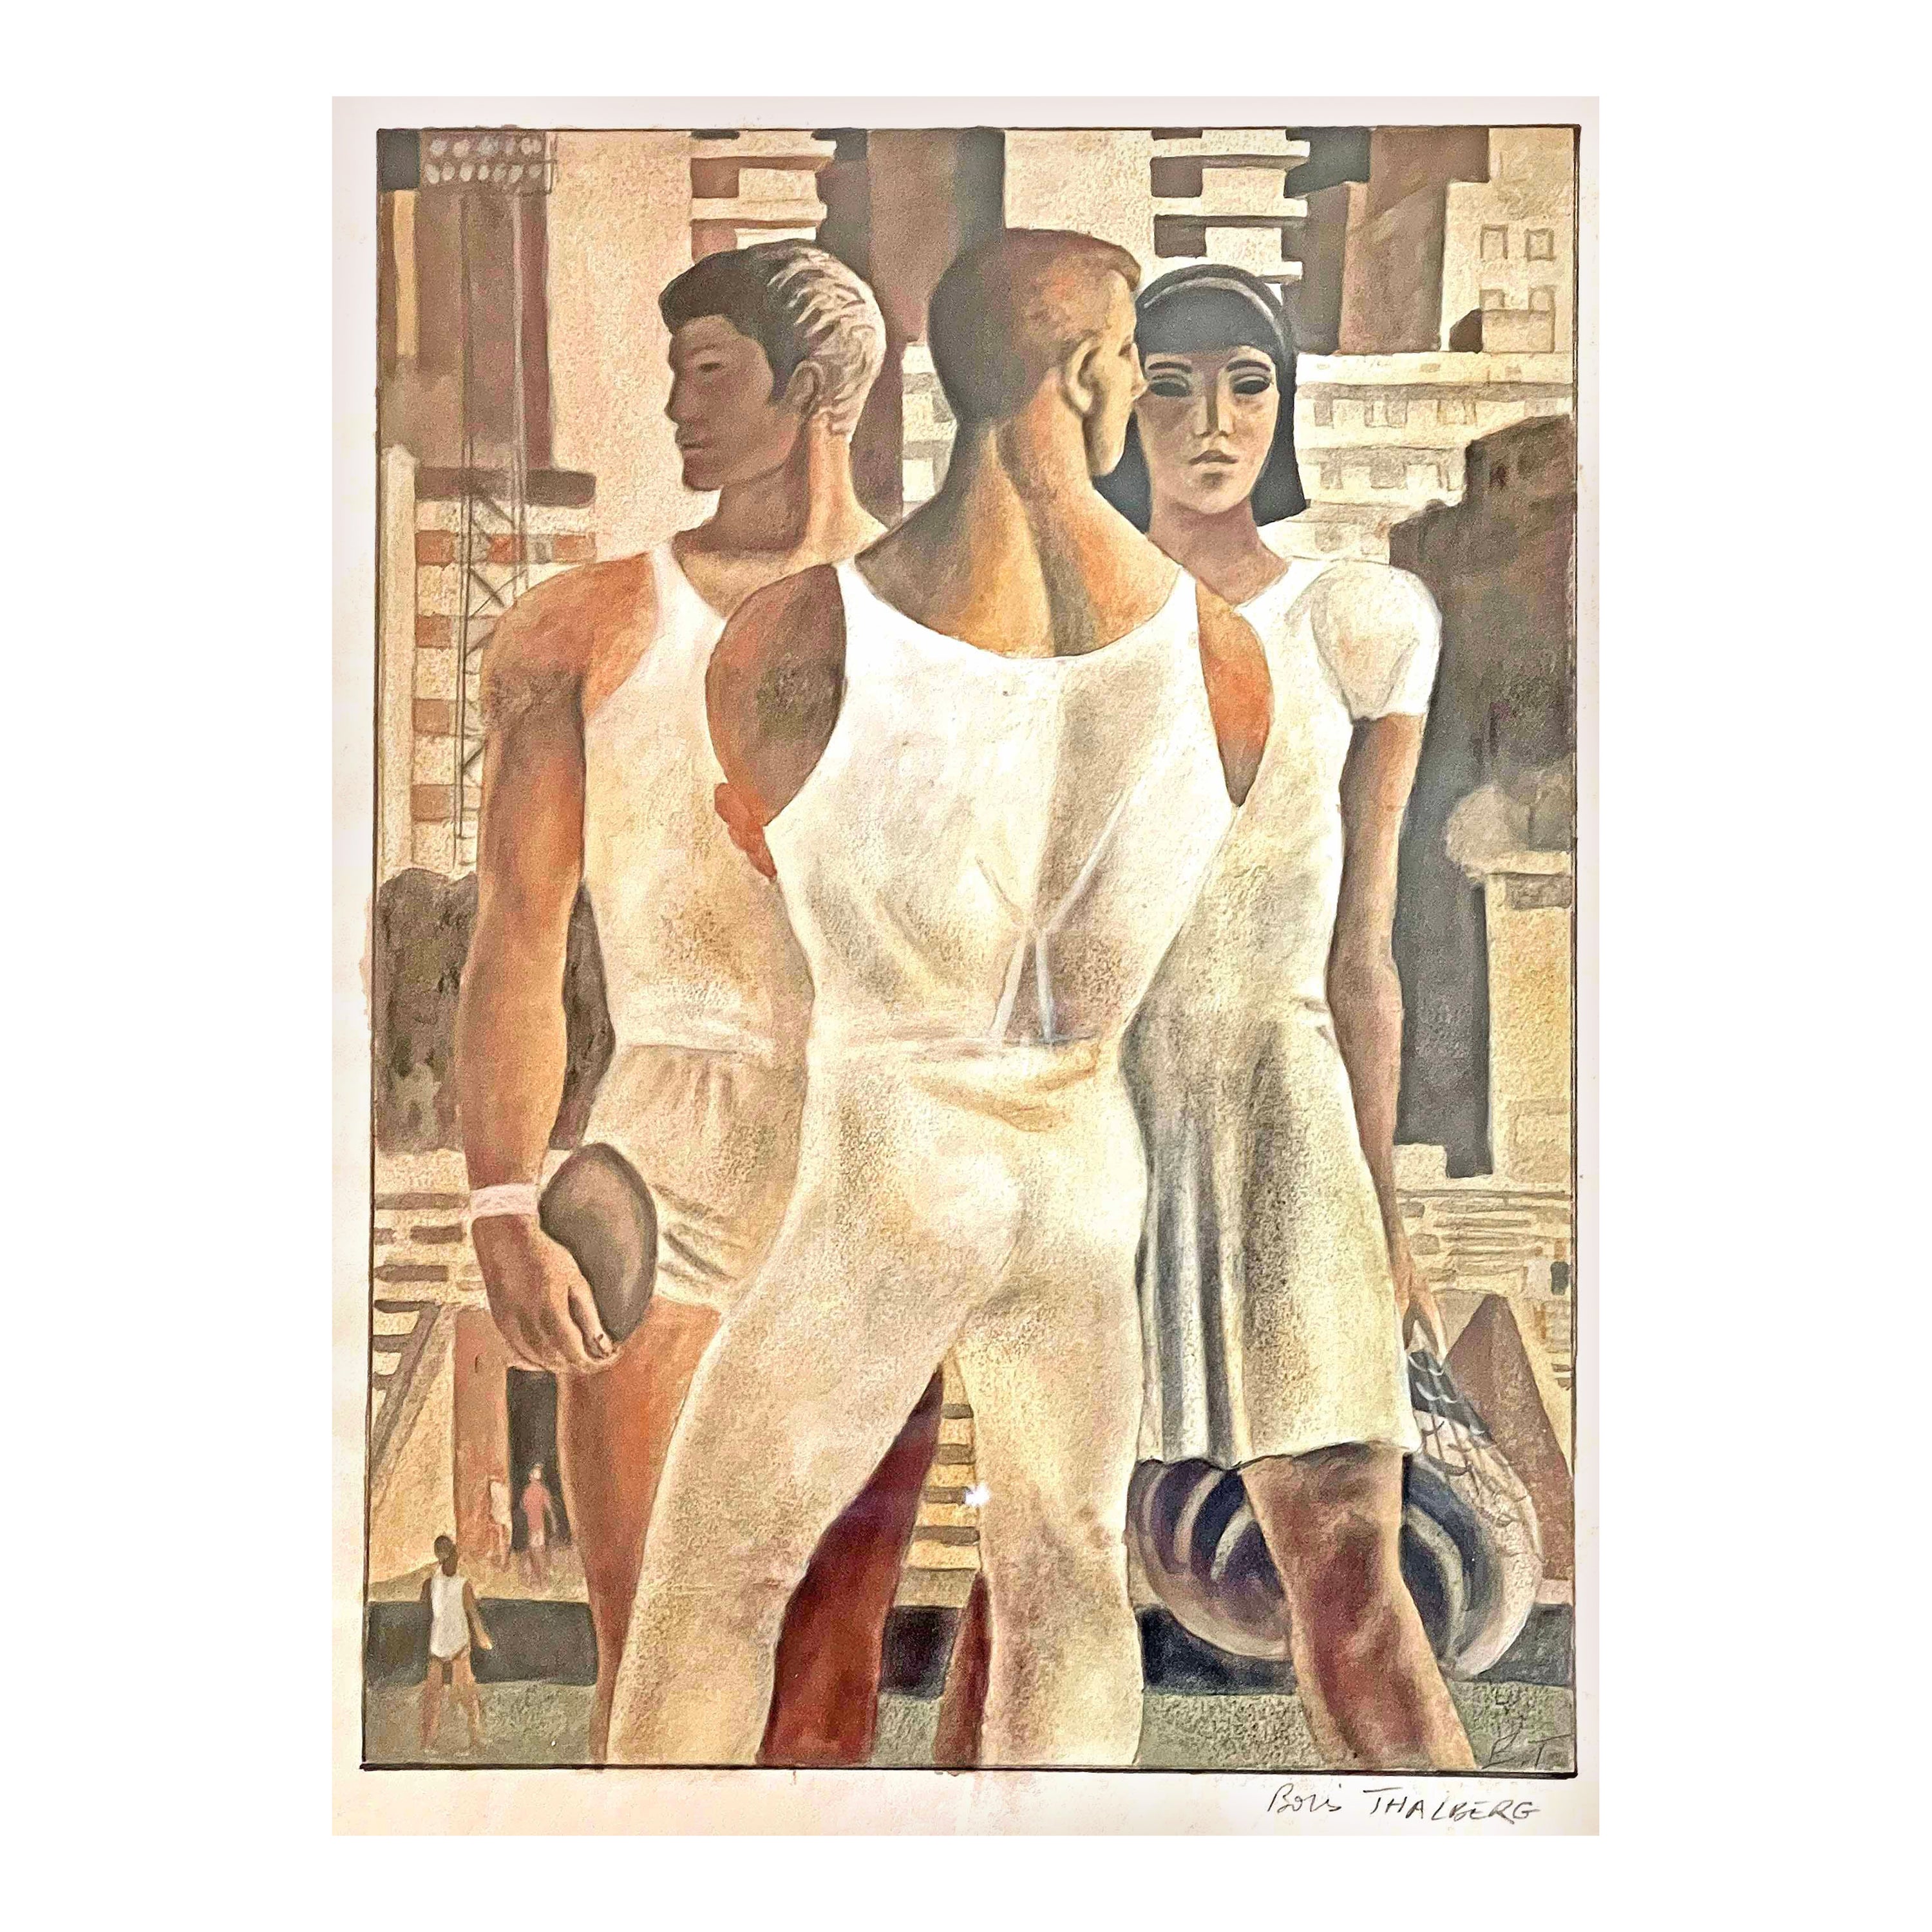 "The Gymnasts, " Important Mid-Century Painting of Soviet Athletes by Talberg For Sale